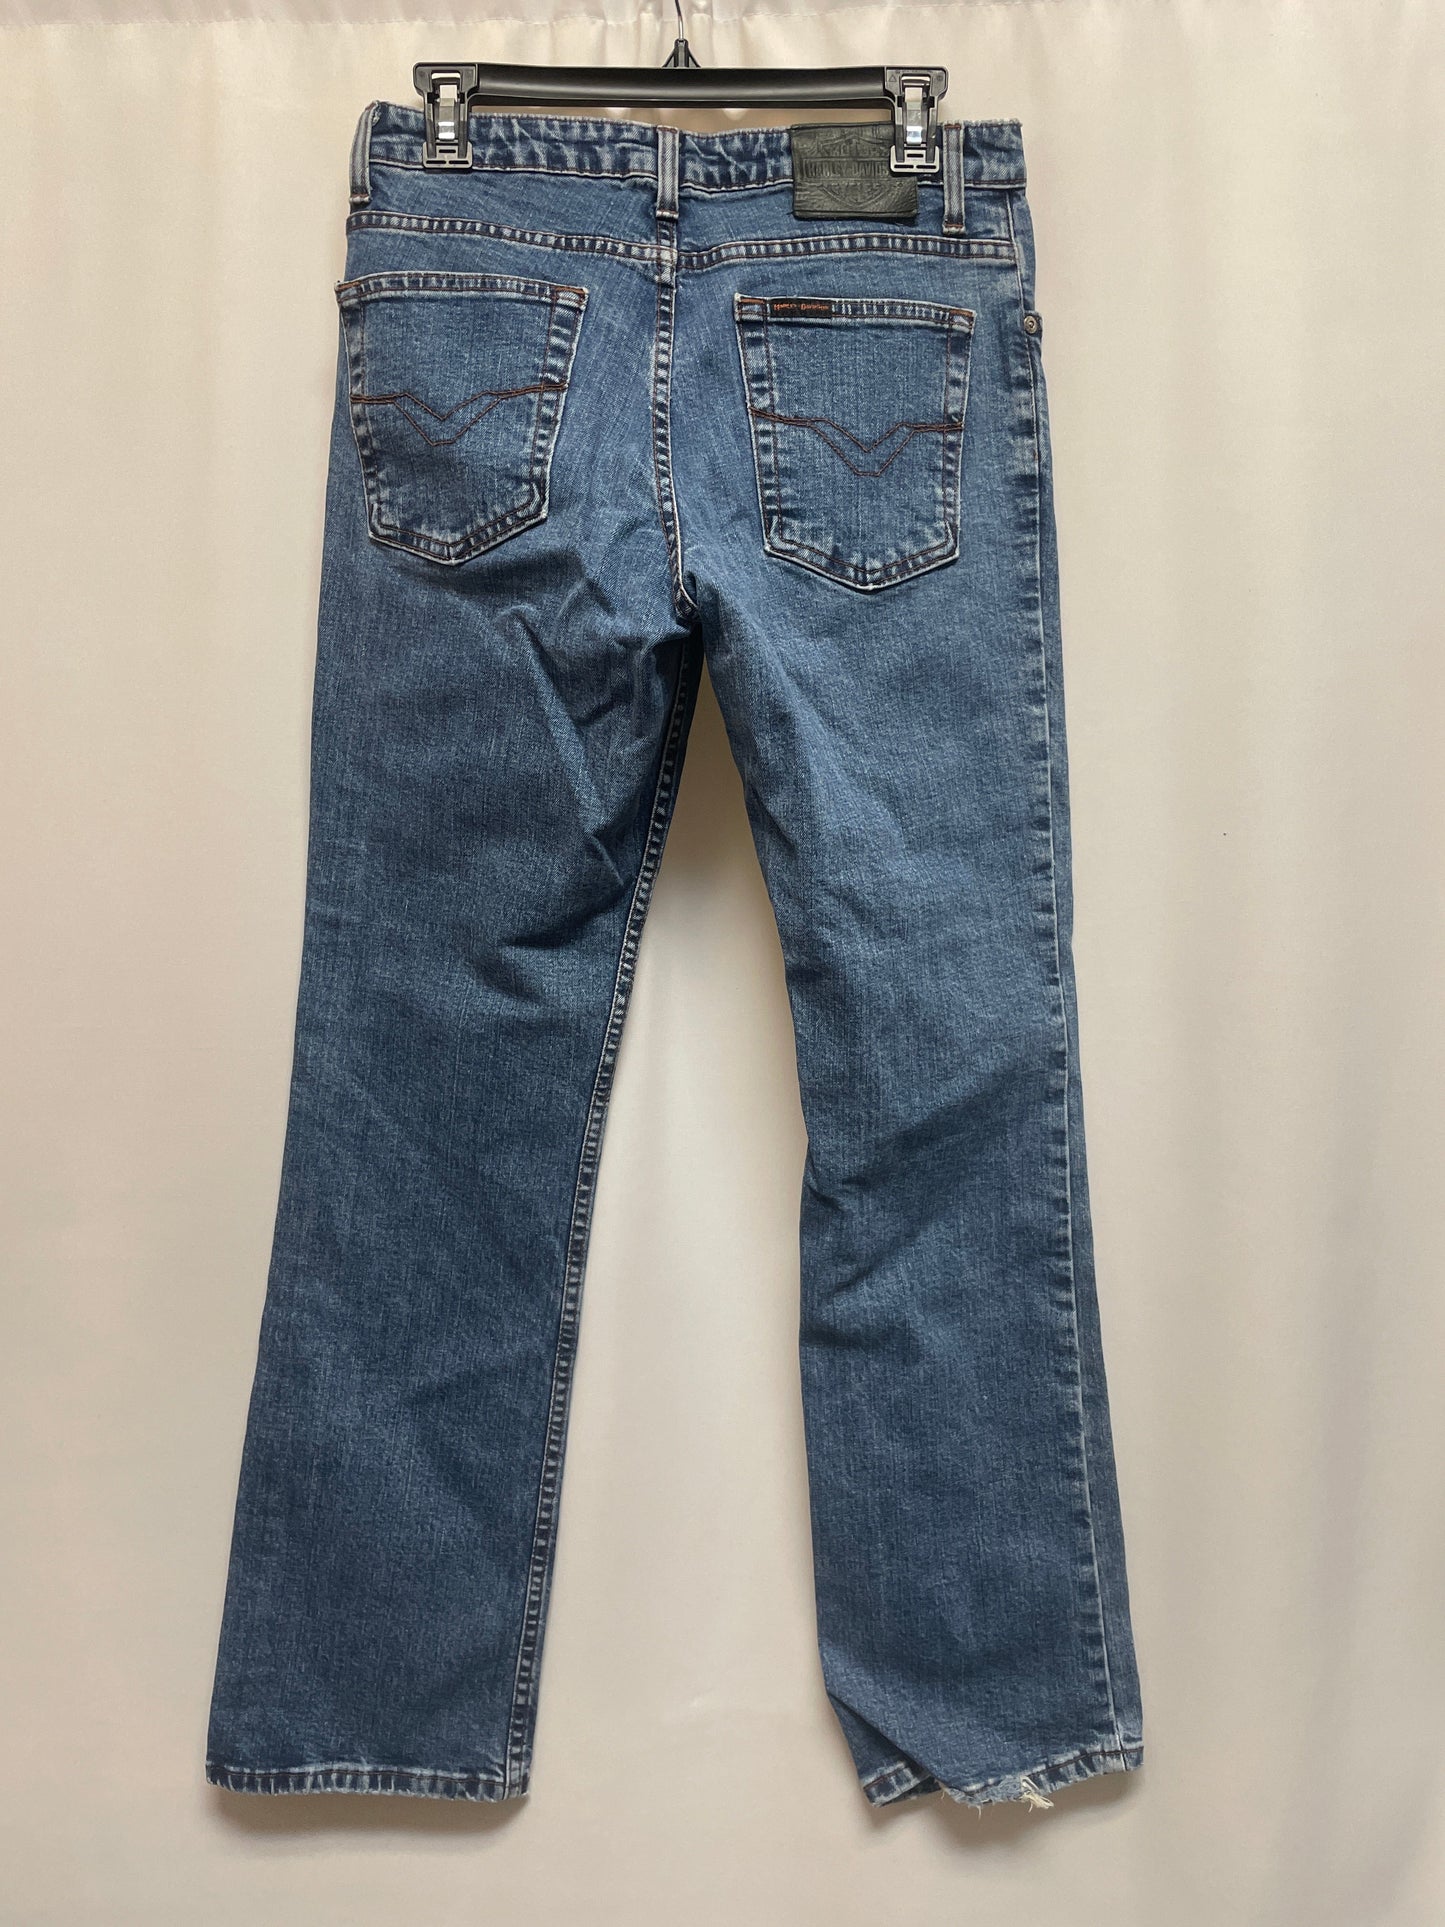 Jeans Straight By Harley Davidson  Size: 8